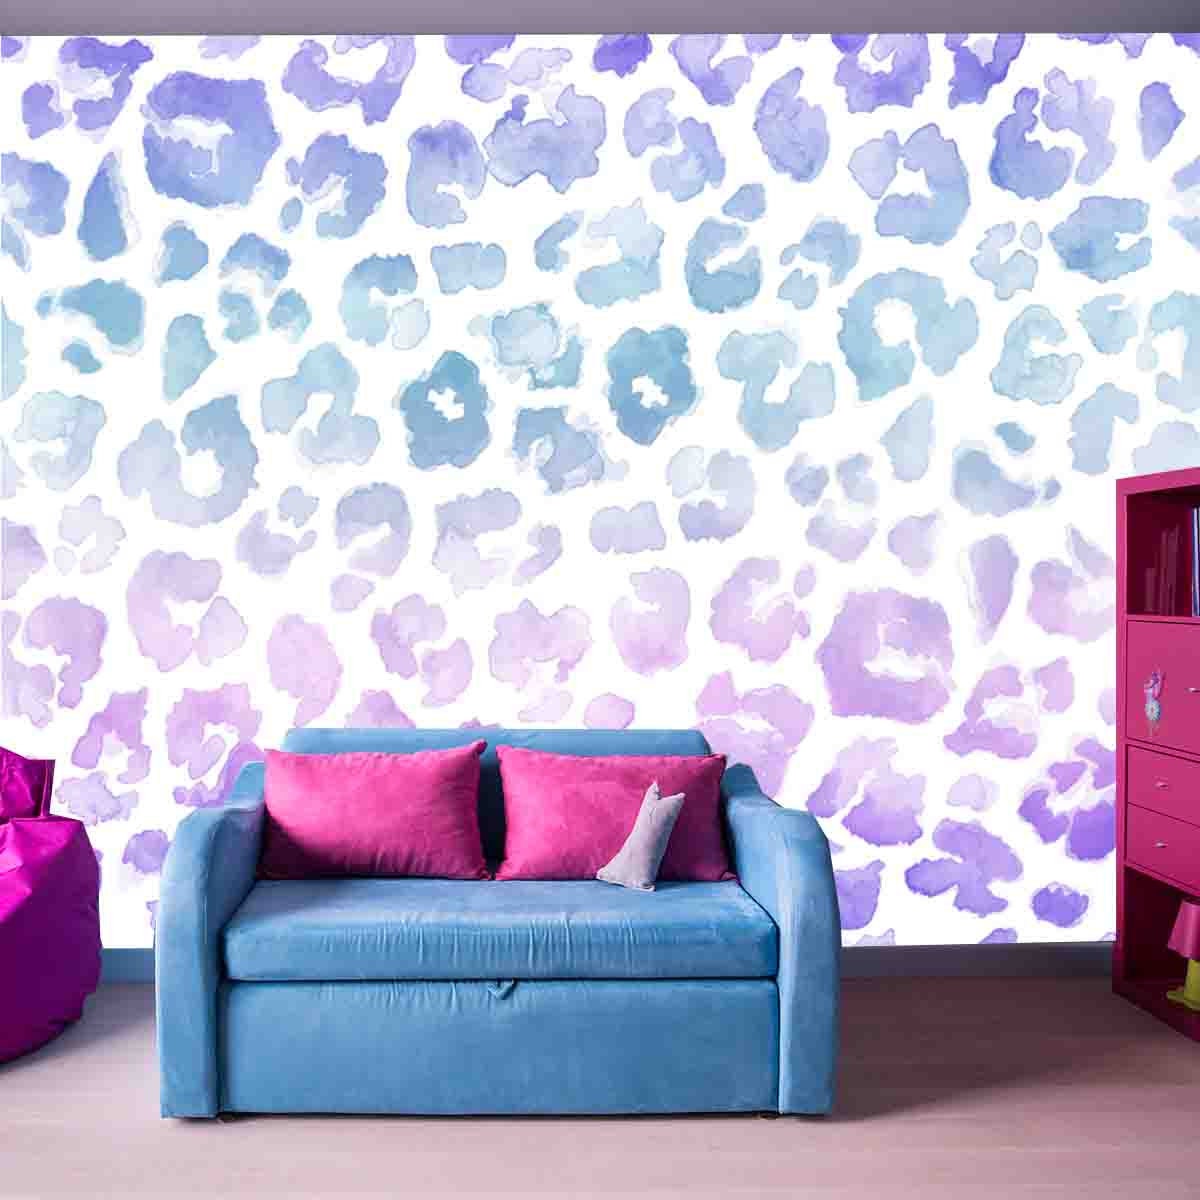 Leopard Animal Print in Muted Tie Dye Hues of Pink, Mint and Purple Wallpaper Girl Bedroom Mural